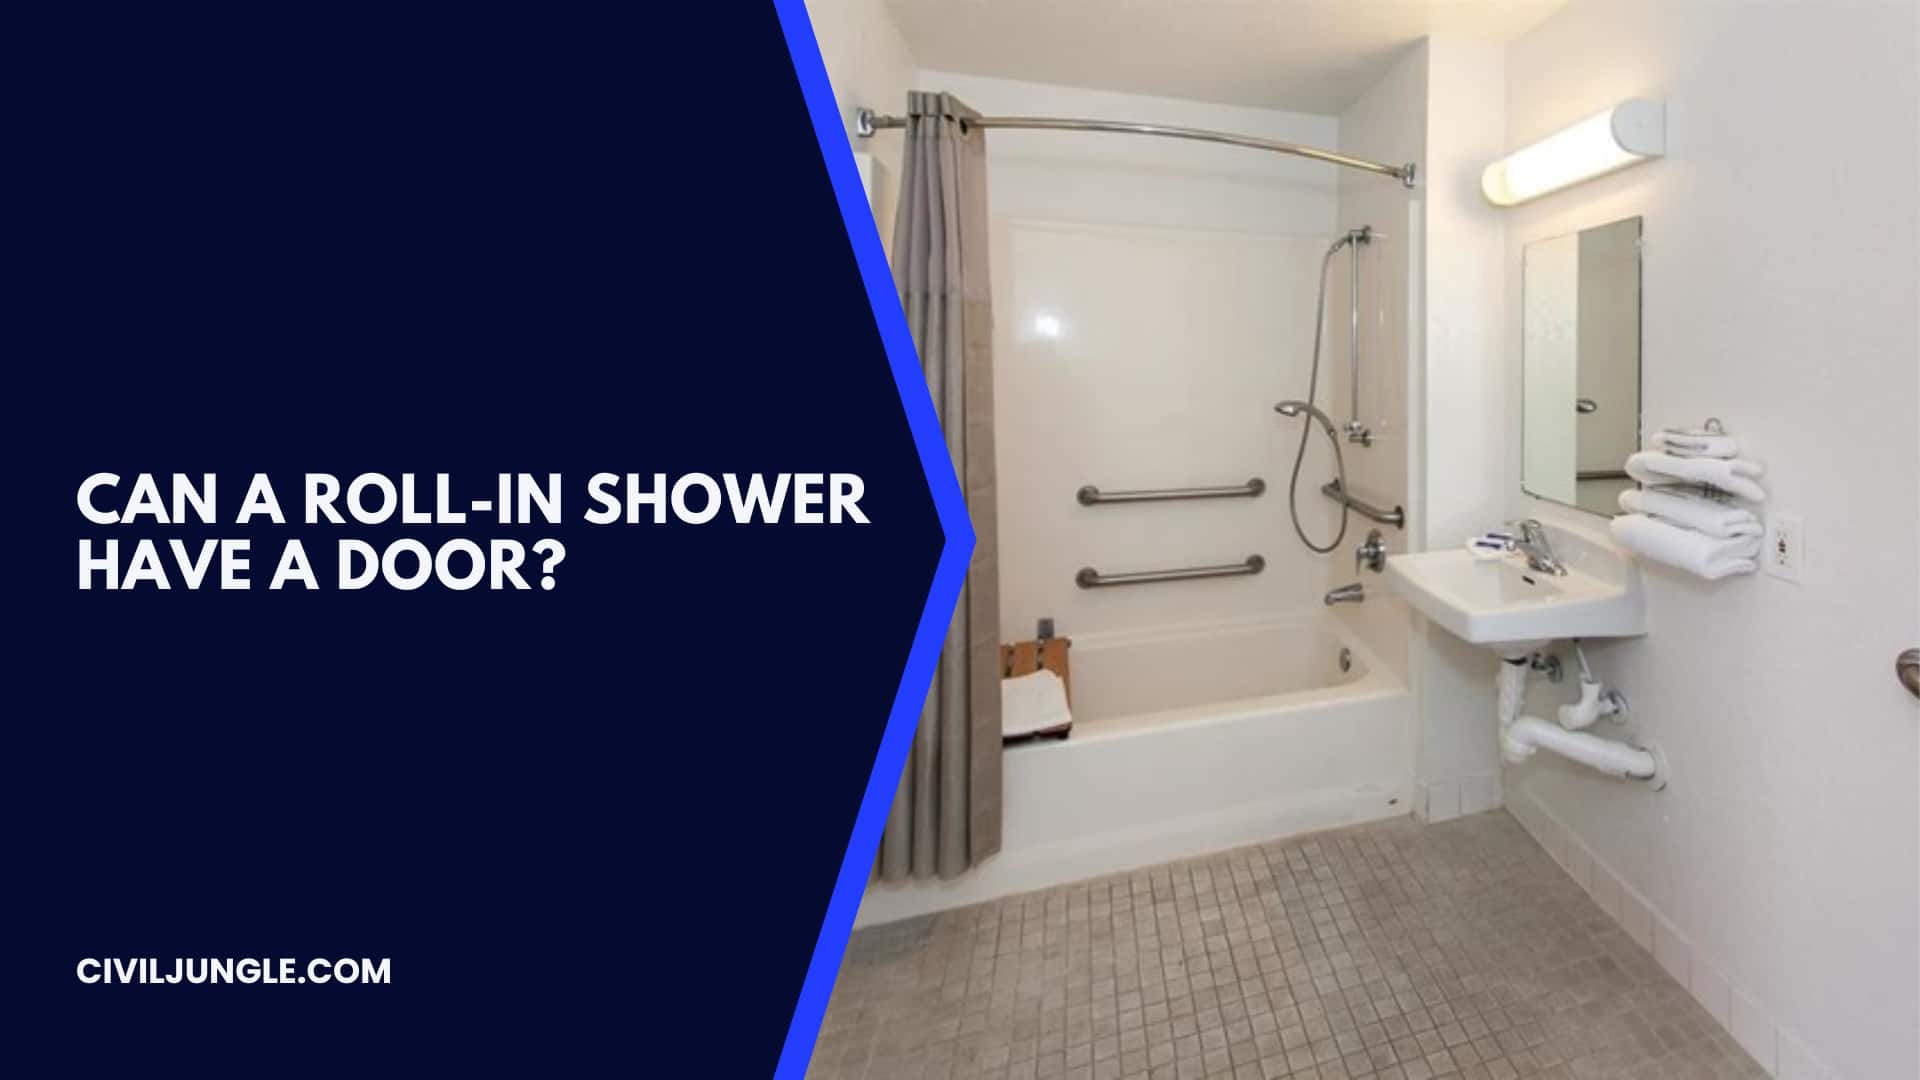 Can a Roll-in Shower Have a Door?